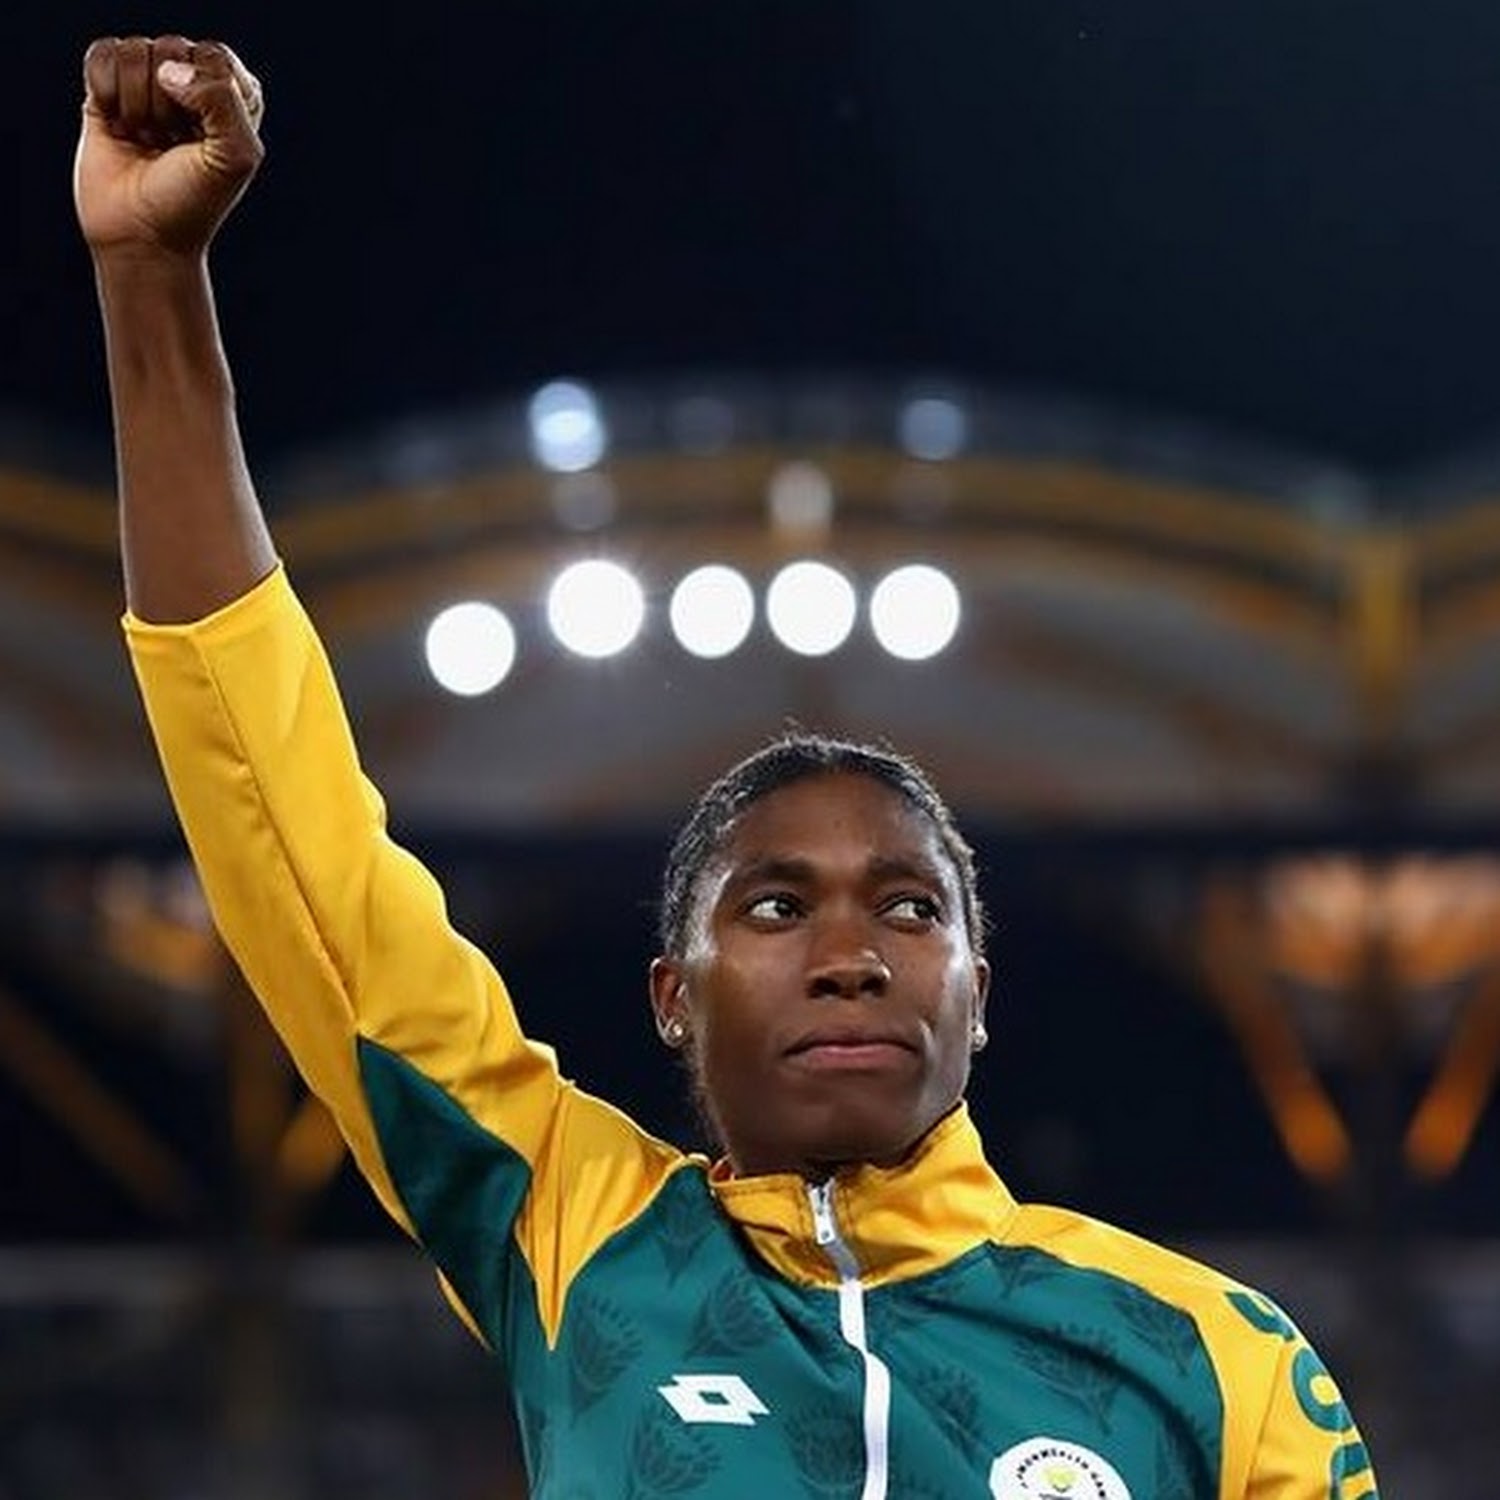 WATCH | This Caster Semenya advert Nike will give you all damn feels